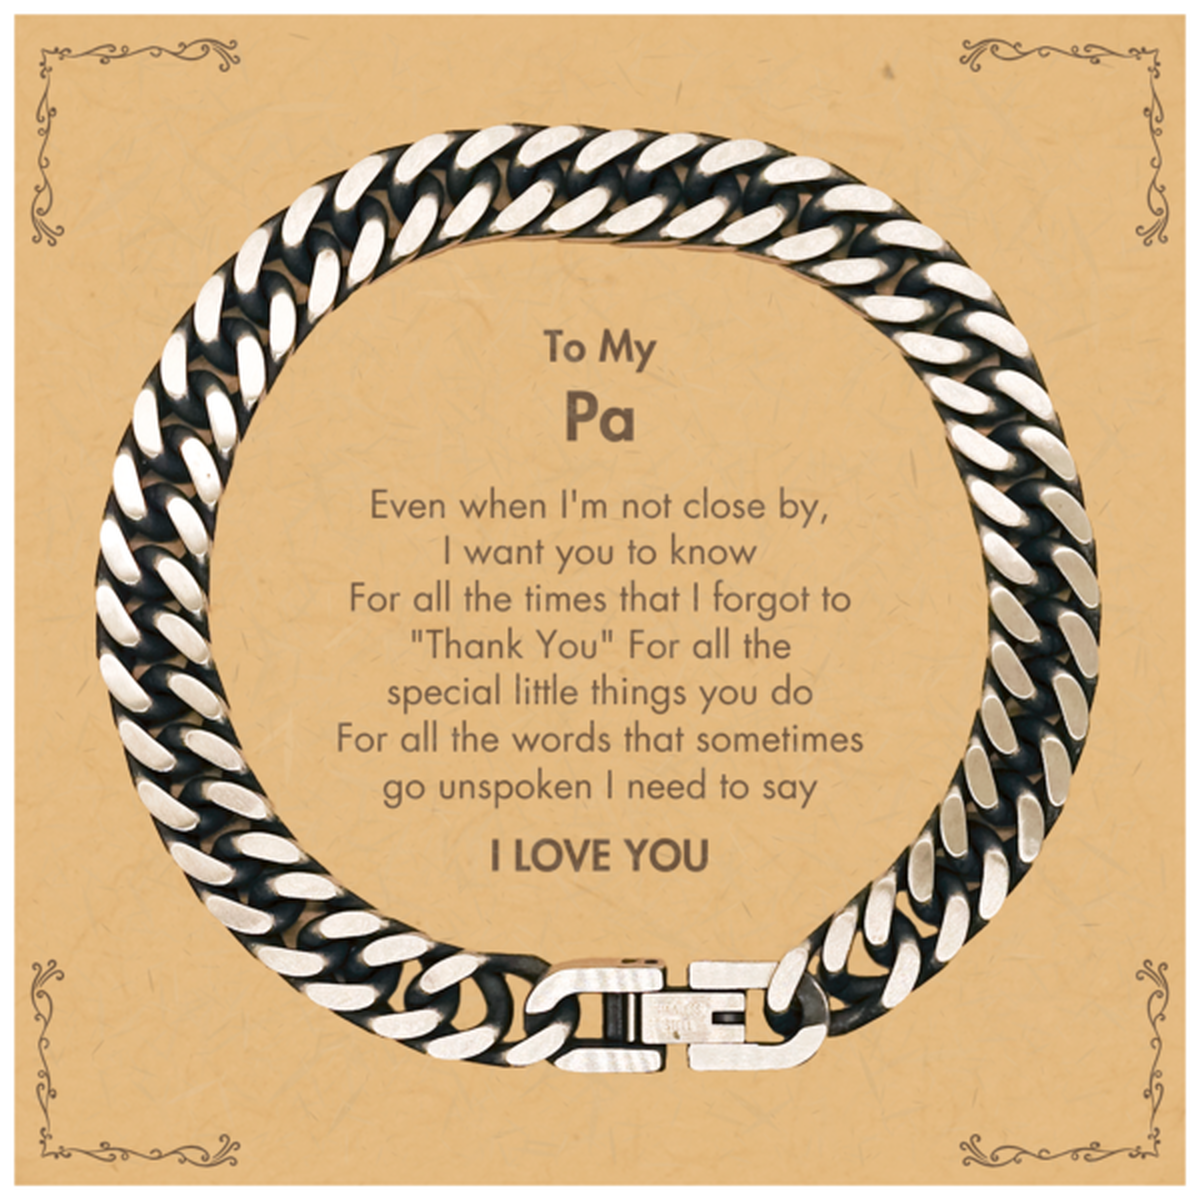 Thank You Gifts for Pa, Keepsake Cuban Link Chain Bracelet Gifts for Pa Birthday Mother's day Father's Day Pa For all the words That sometimes go unspoken I need to say I LOVE YOU